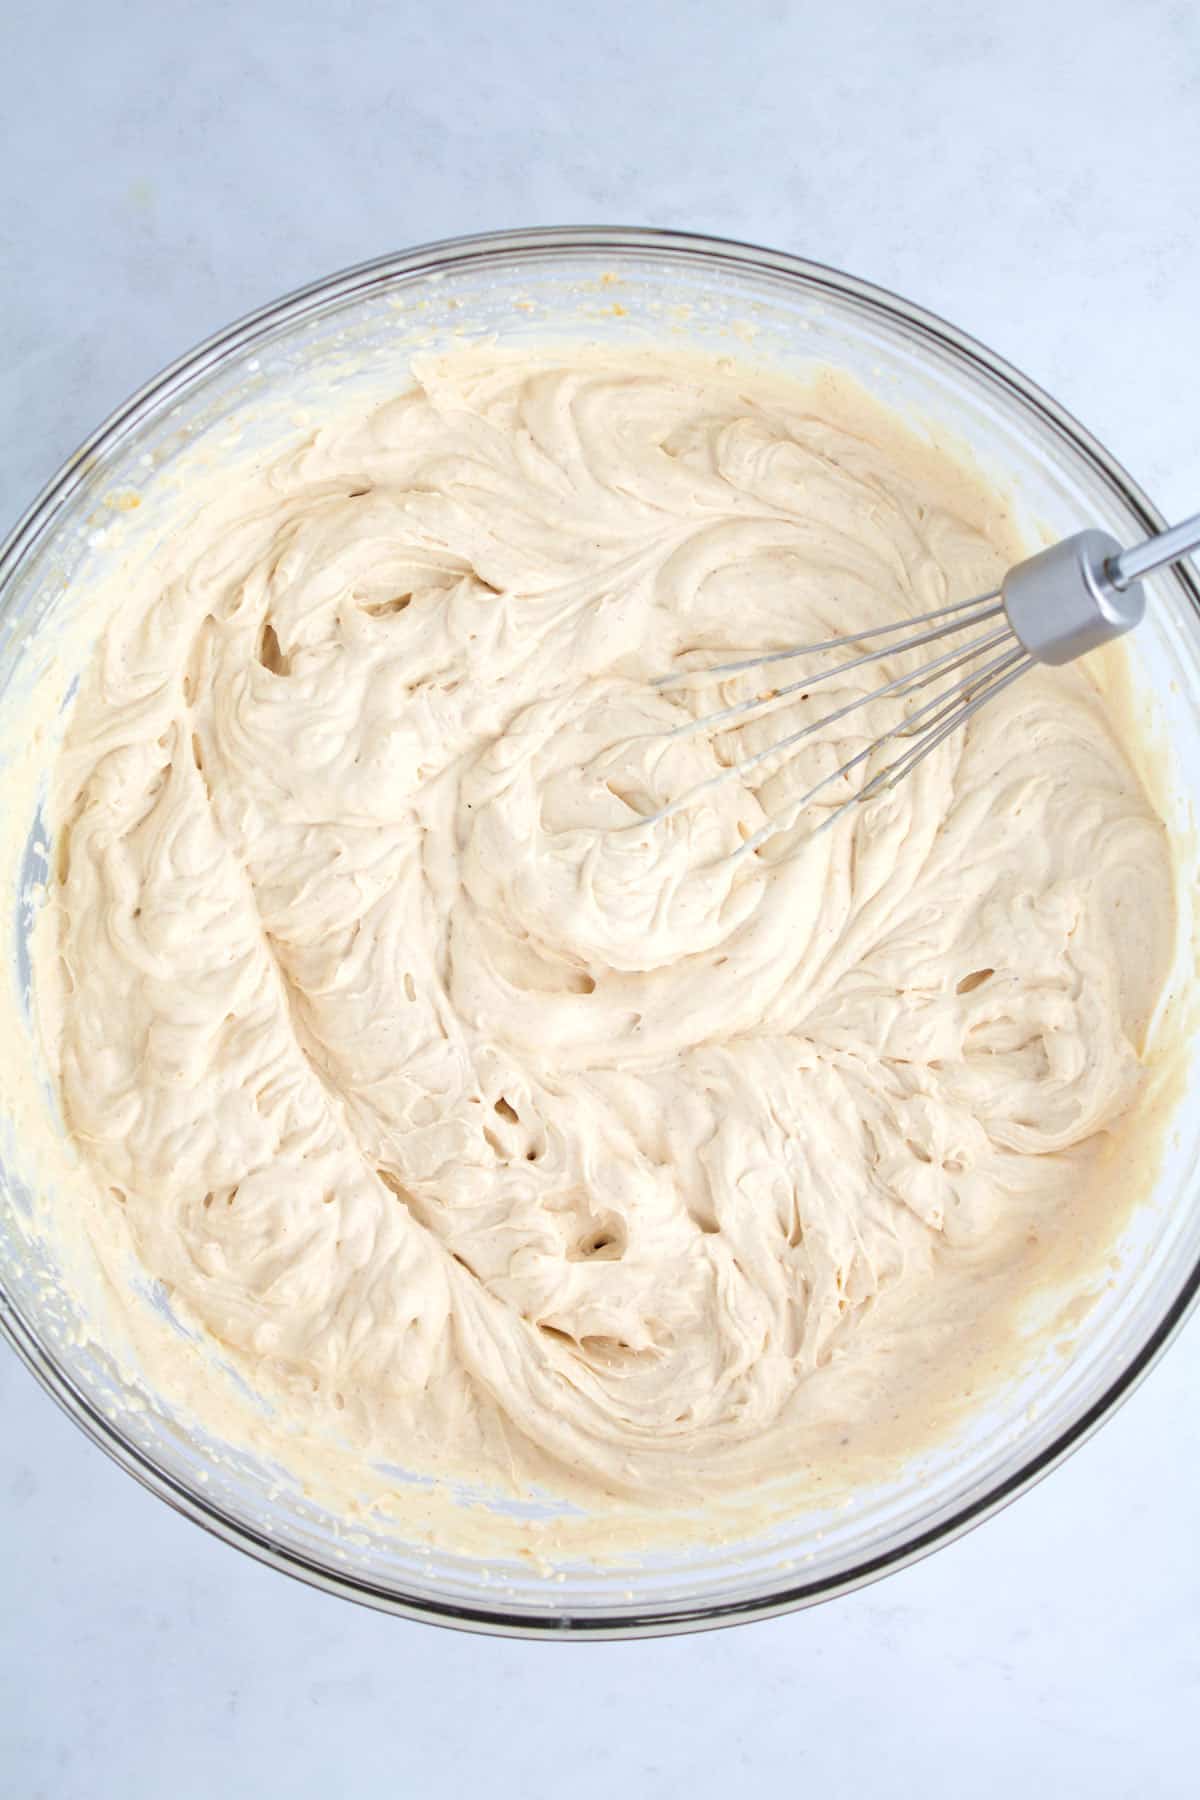 Peanut butter whipped cream in a glass bowl after whipping.